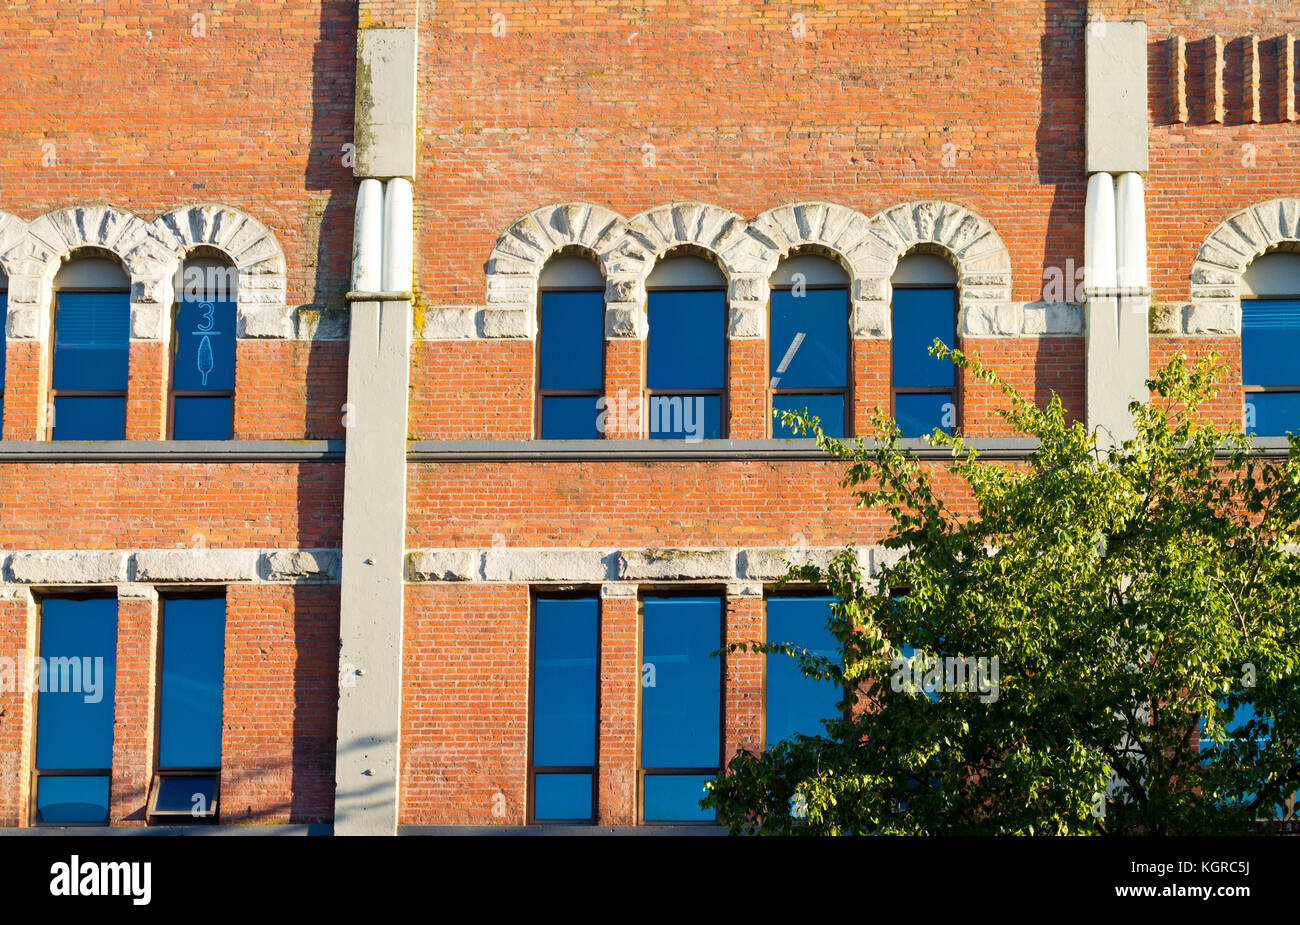 Arched windows form a pattern on the brick wall of a building in Victoria, BC, Canada. Stock Photo